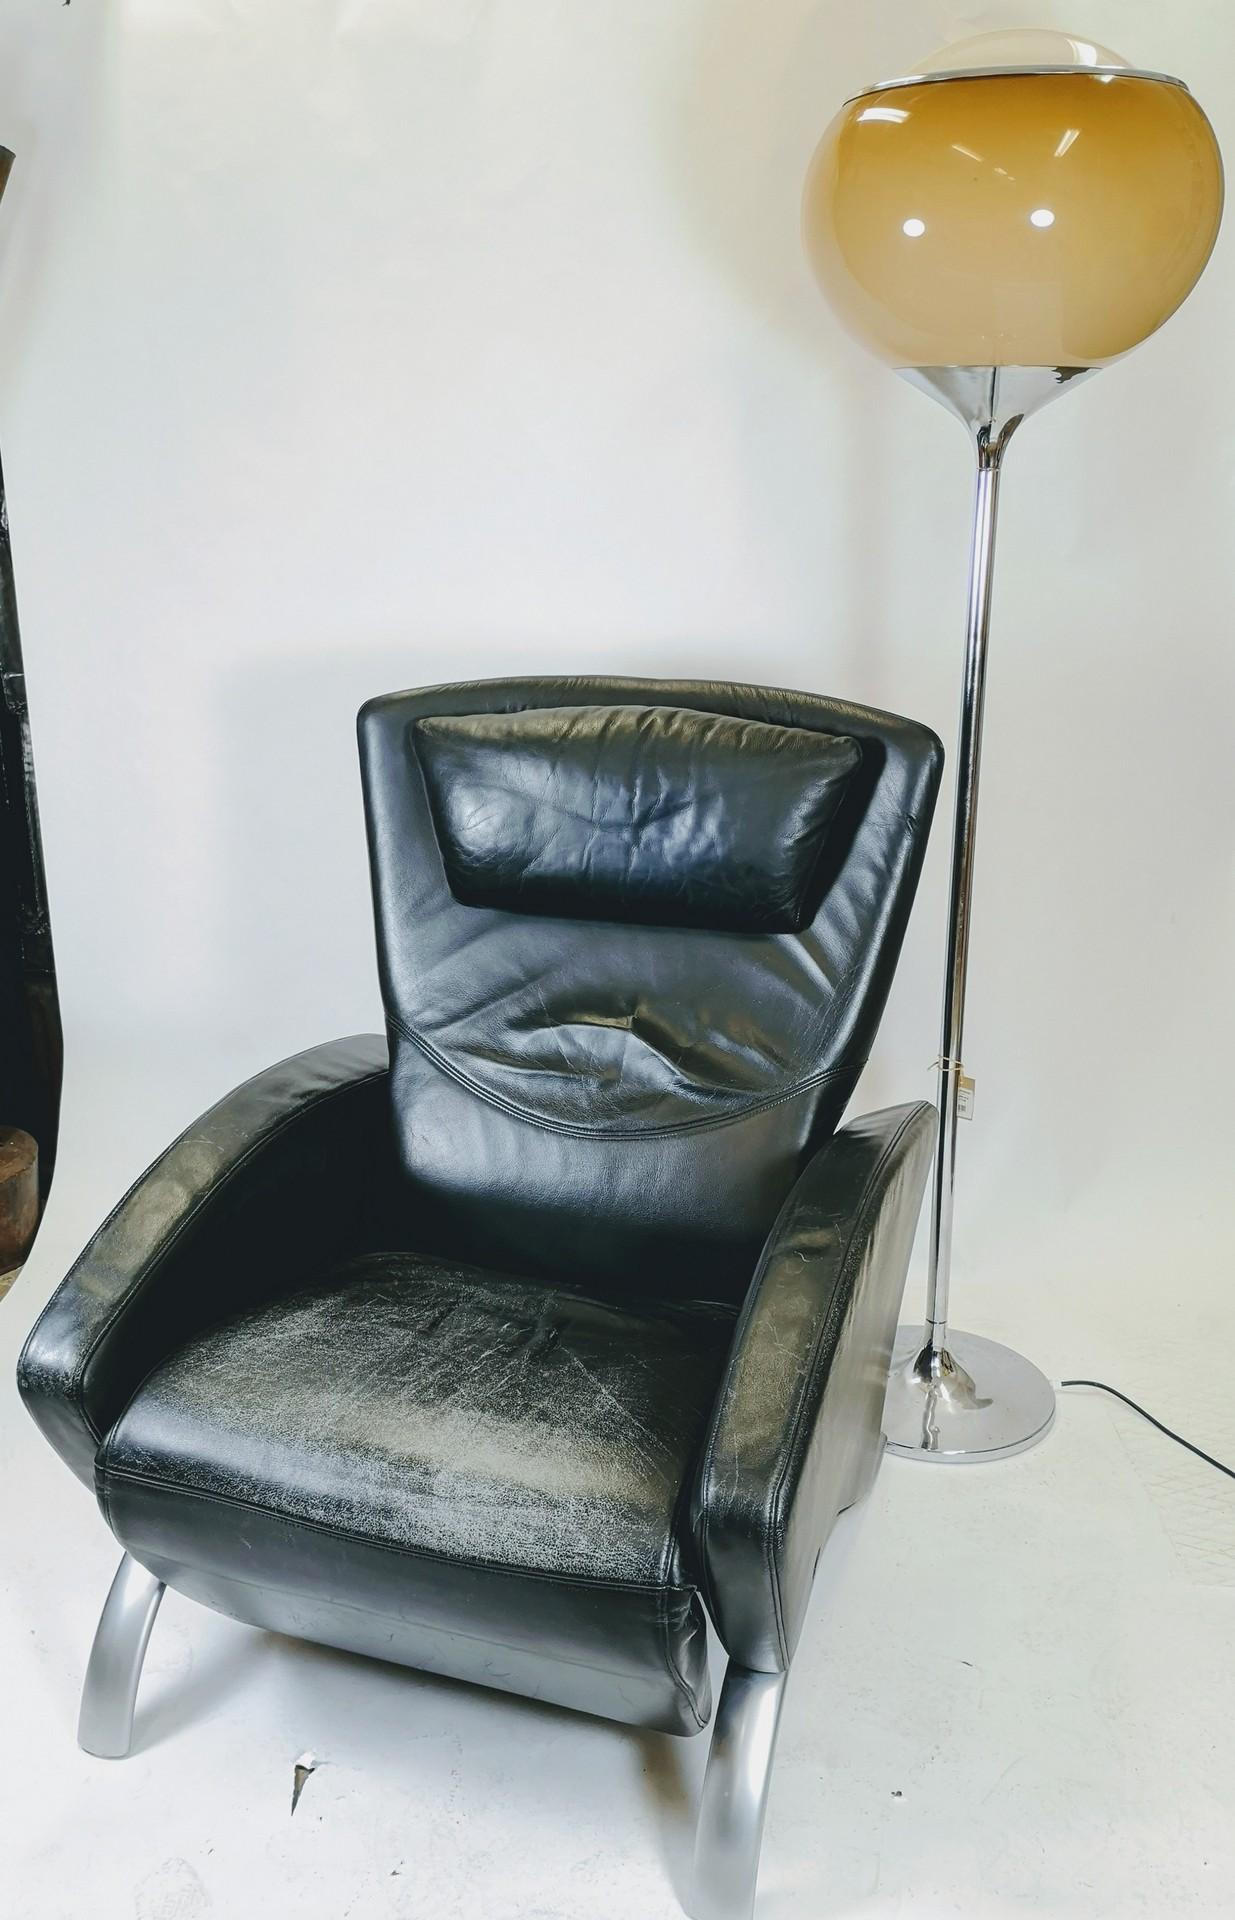 Adjustable lounge leather armchair by Rolf Benz. Extendable foot rest and adjustable back. Silver painted steel legs, with original Rolf Benz stamp. From around the 1980s. Leather has some small fading, scratches.